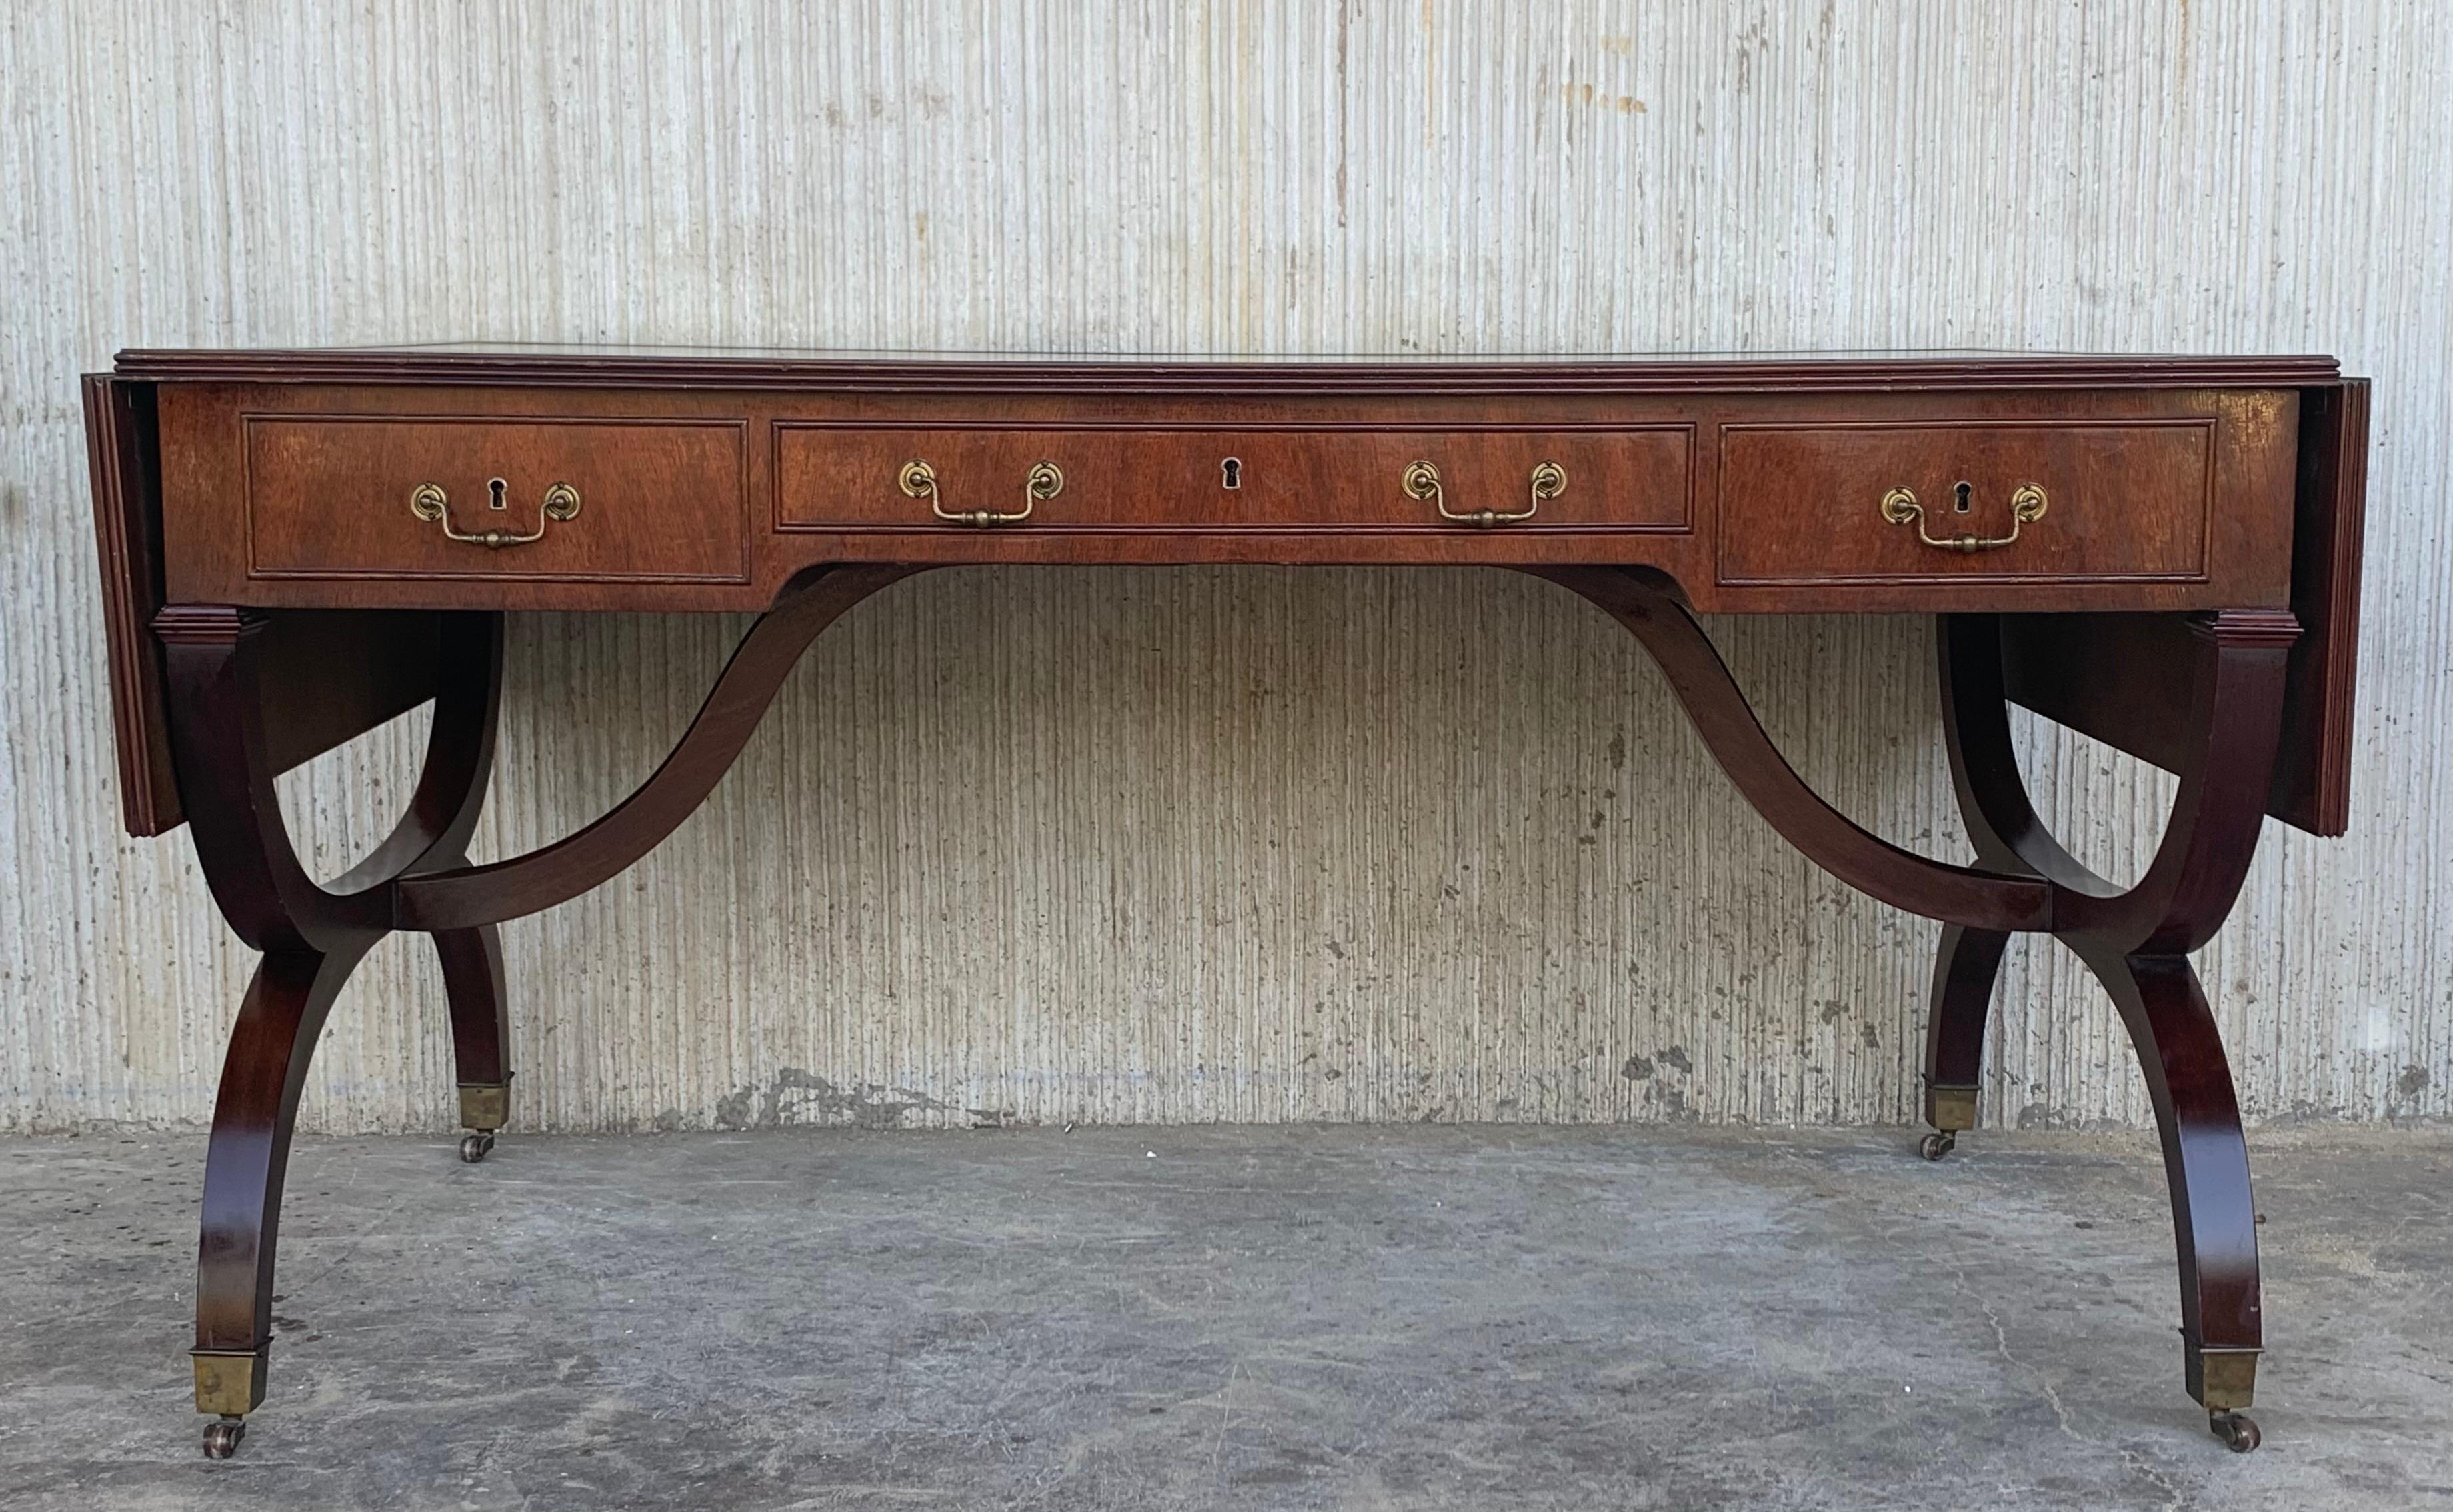 Empire Revival Stunning Victorian Library Writing Table or Desk Brown Leather Top Gillows Legs